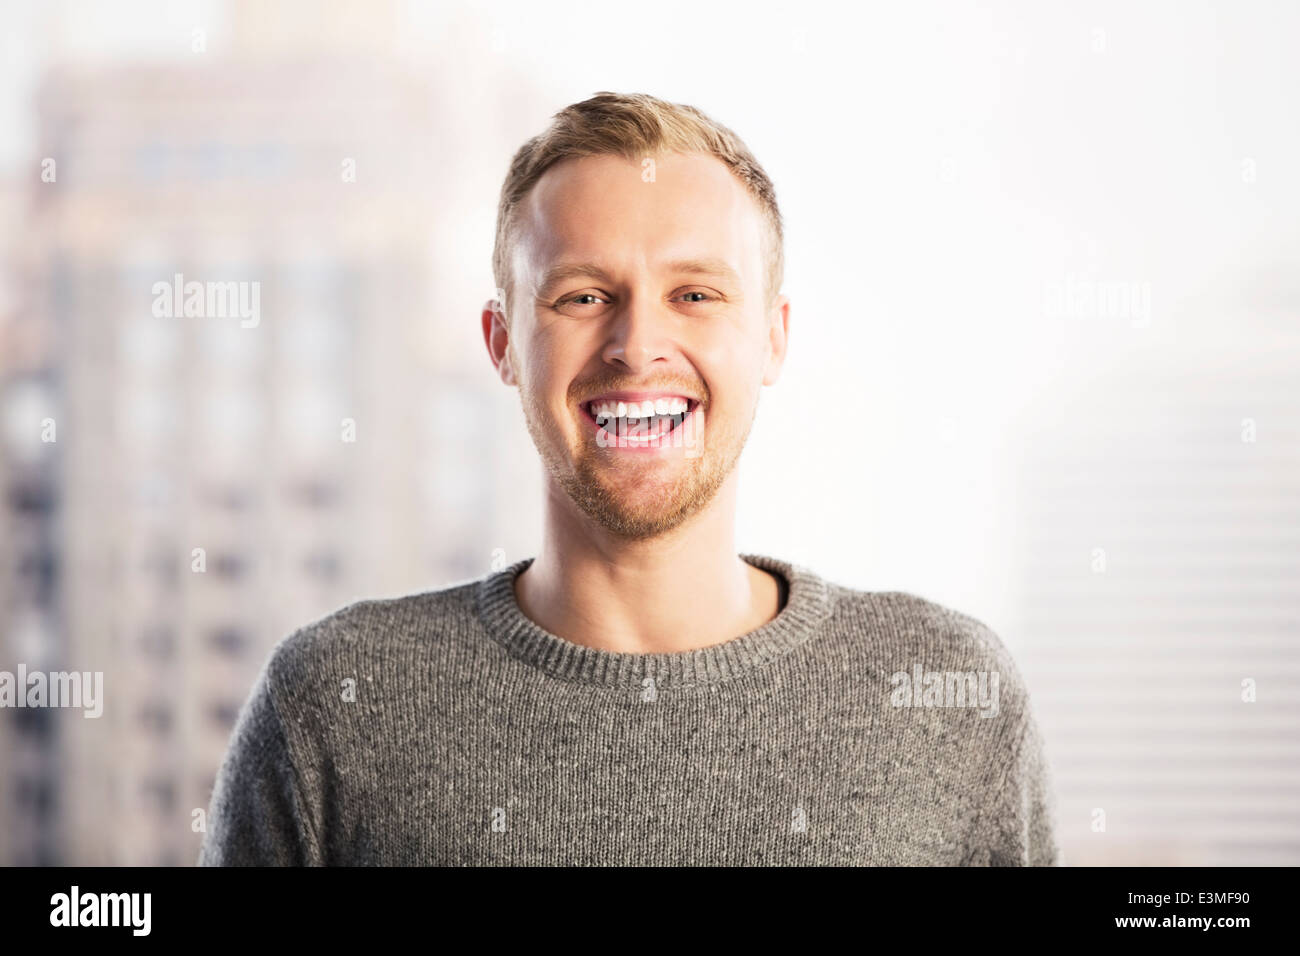 Portrait of laughing businessman Stock Photo